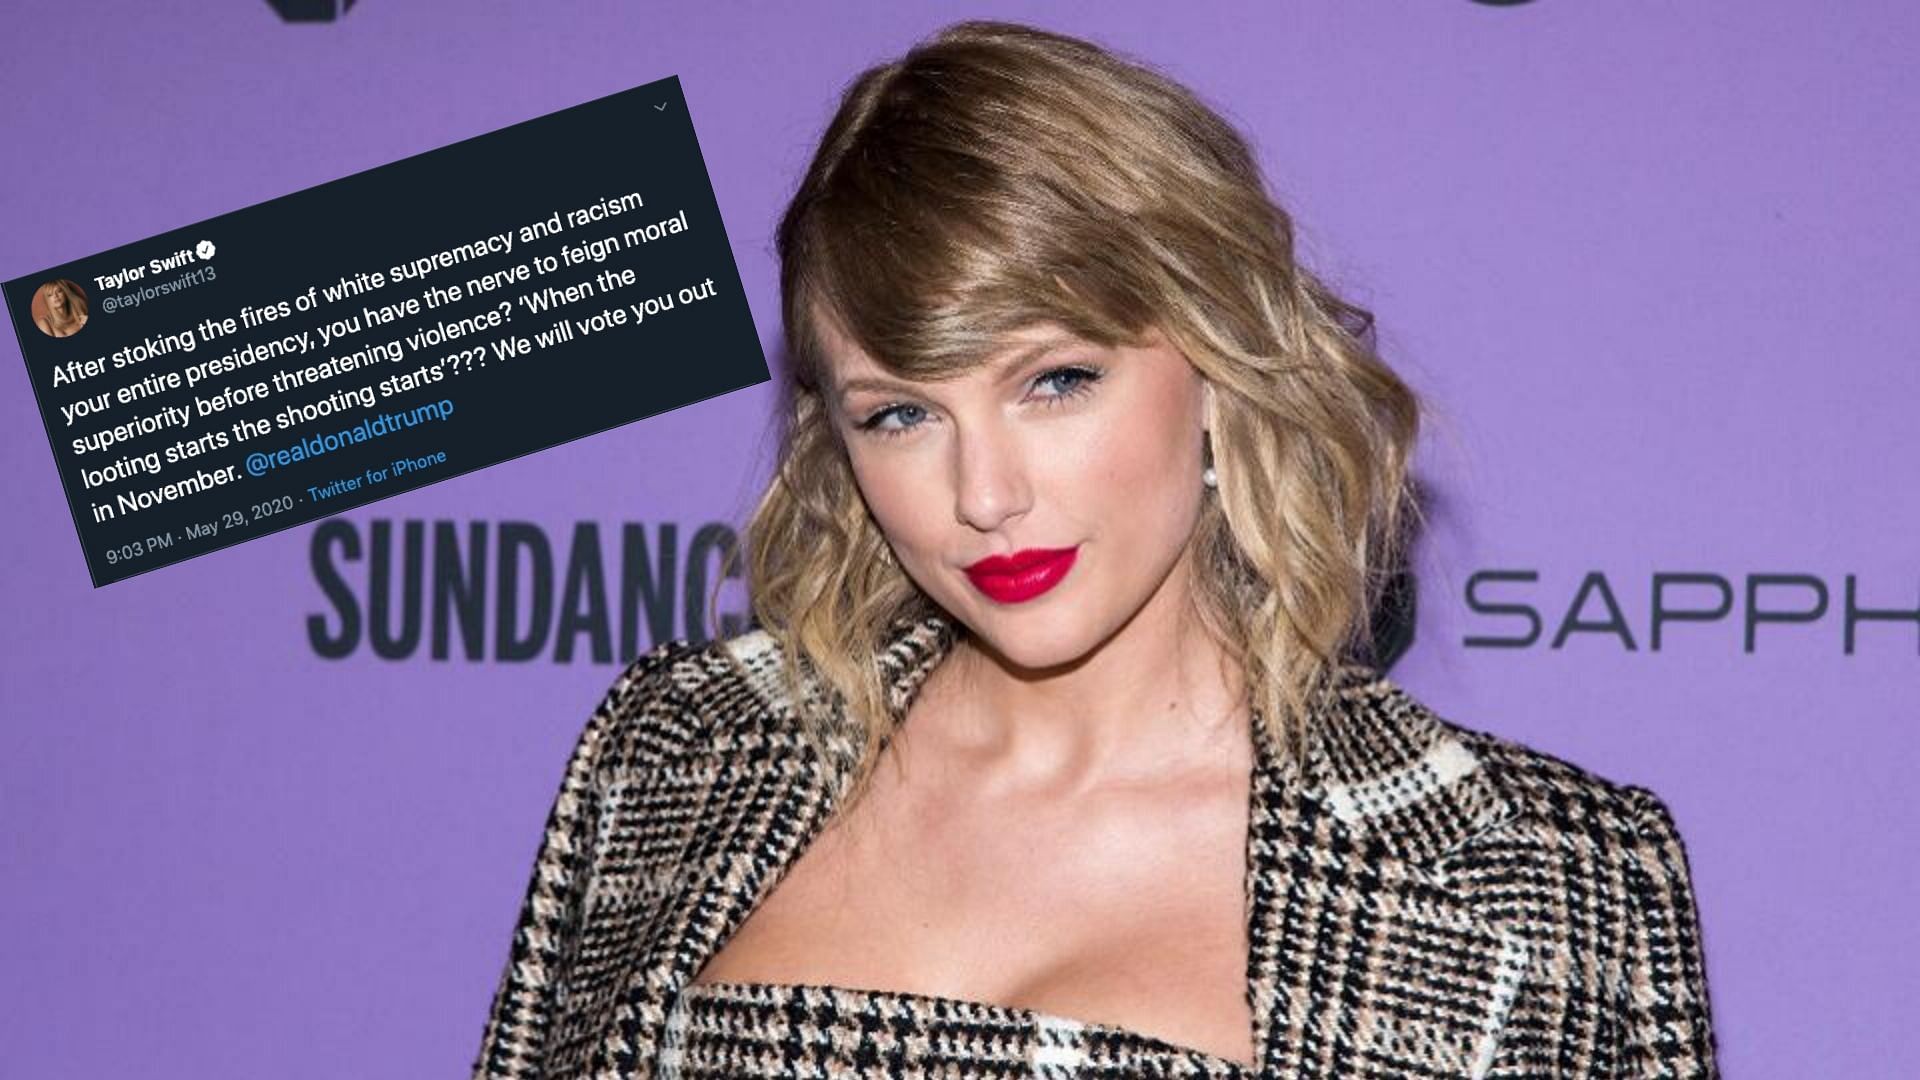 Taylor Swift tweets against the US President Donald Trump.